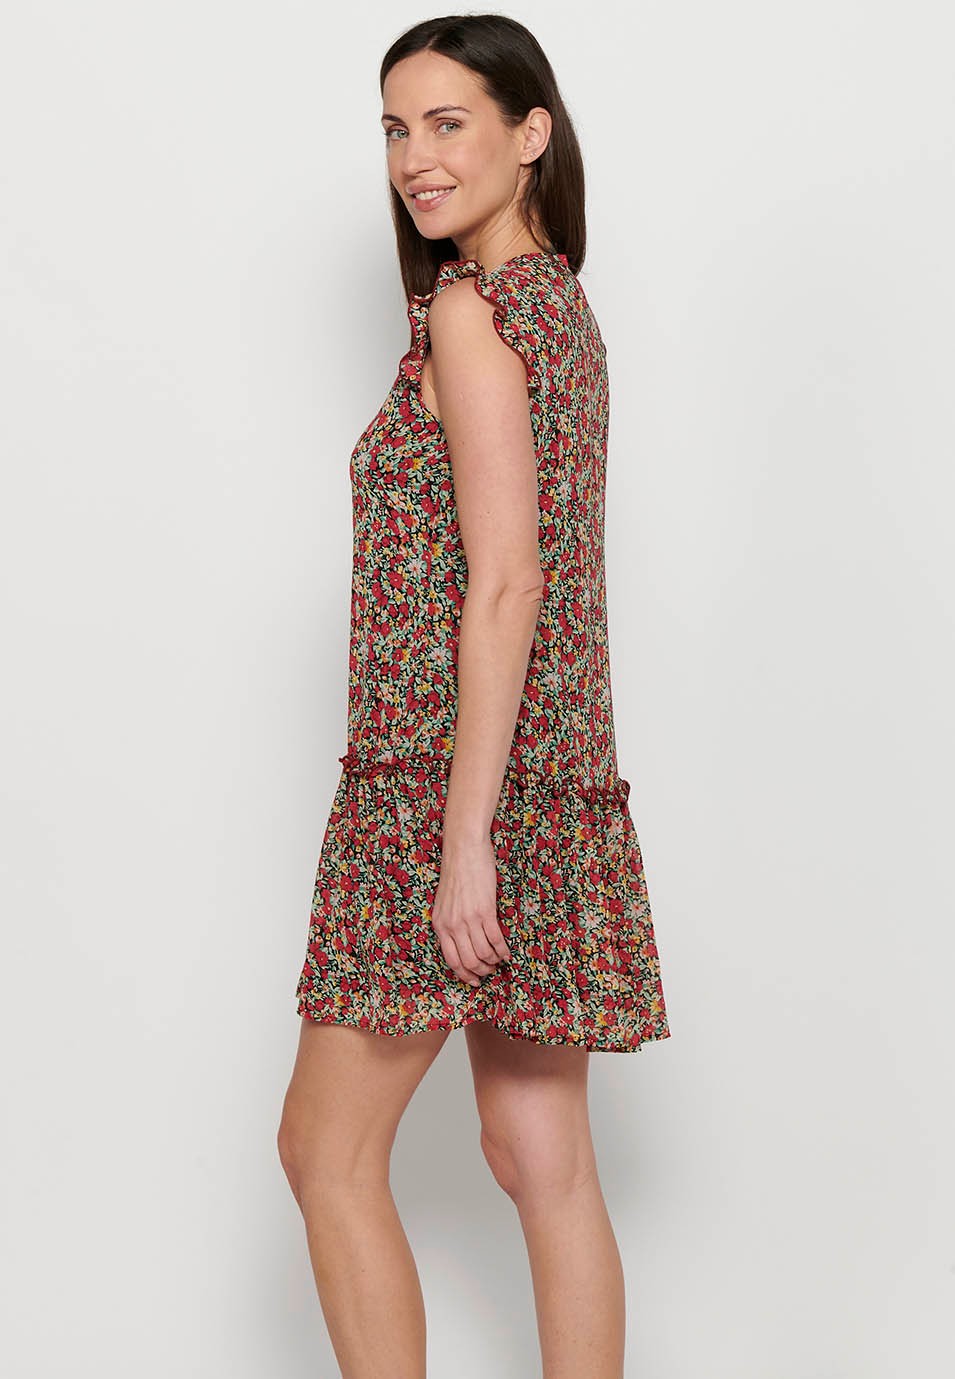 Short shirt dress with hip cut and ruffle finish with button front closure and Multicolor floral print for Women 5